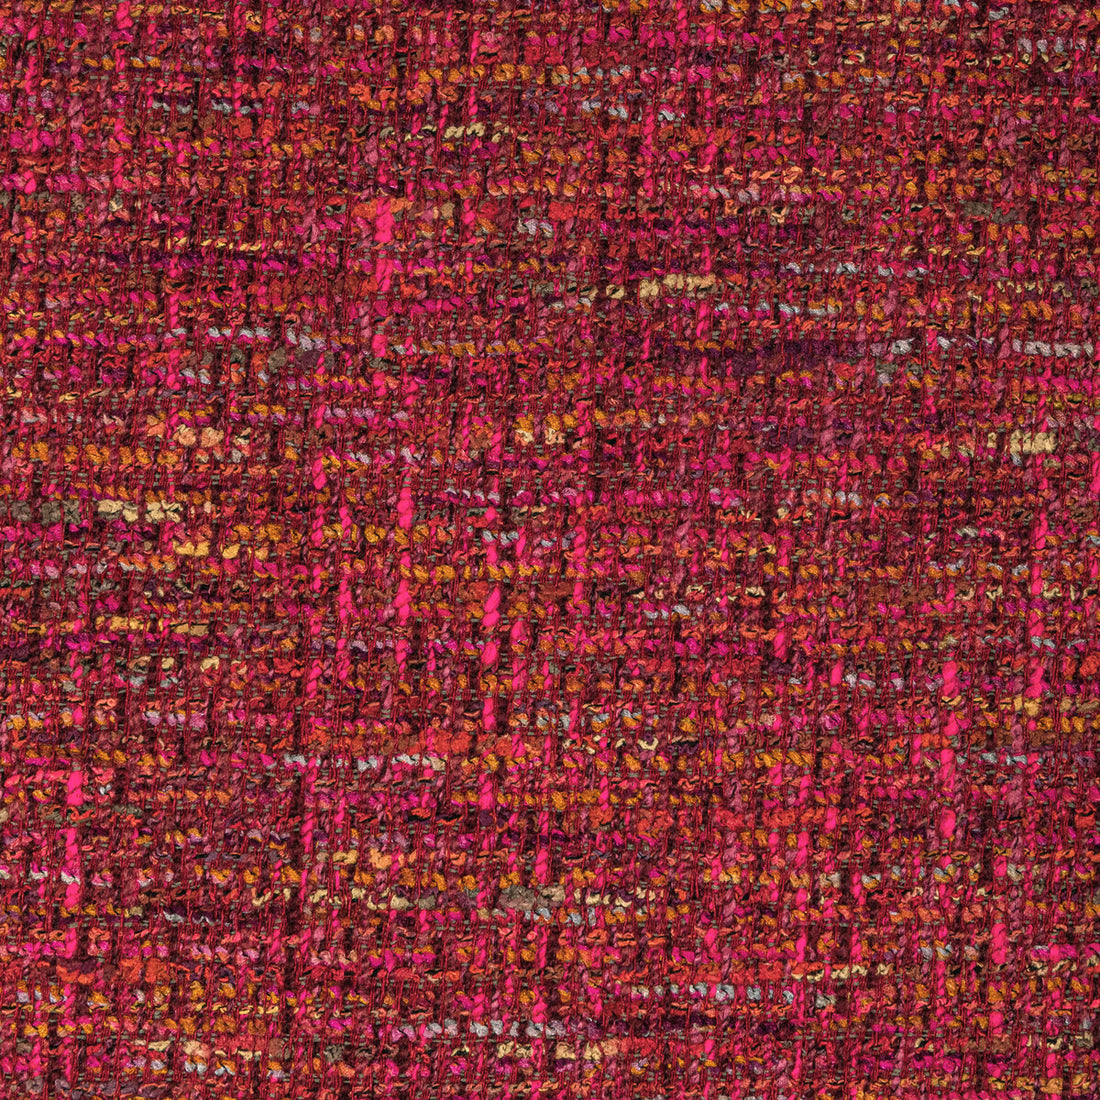 Salvadore fabric in sangria color - pattern 36749.97.0 - by Kravet Contract in the Refined Textures Performance Crypton collection